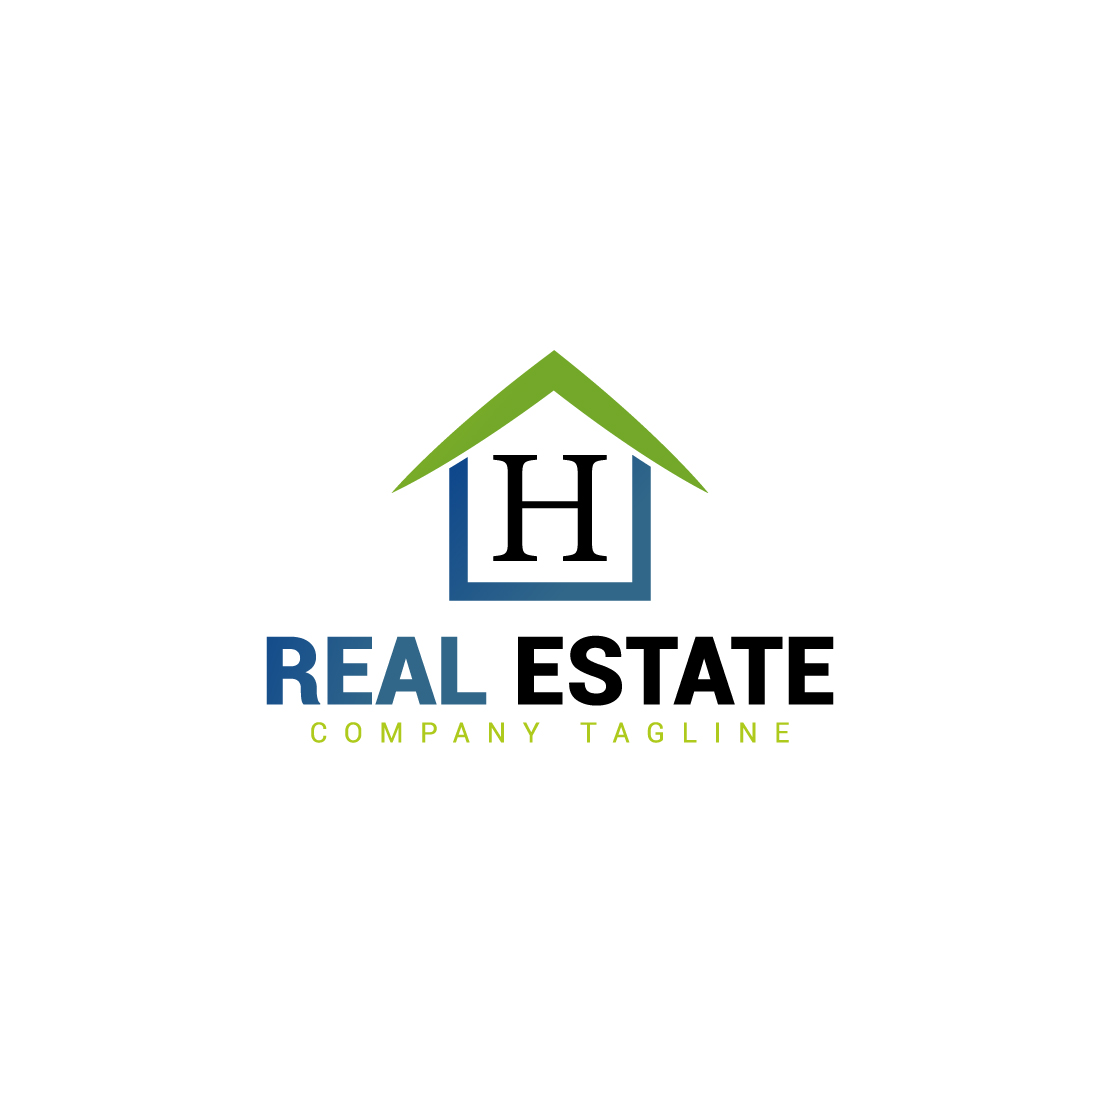 Real estate logo with green, dark blue color and H letter cover image.